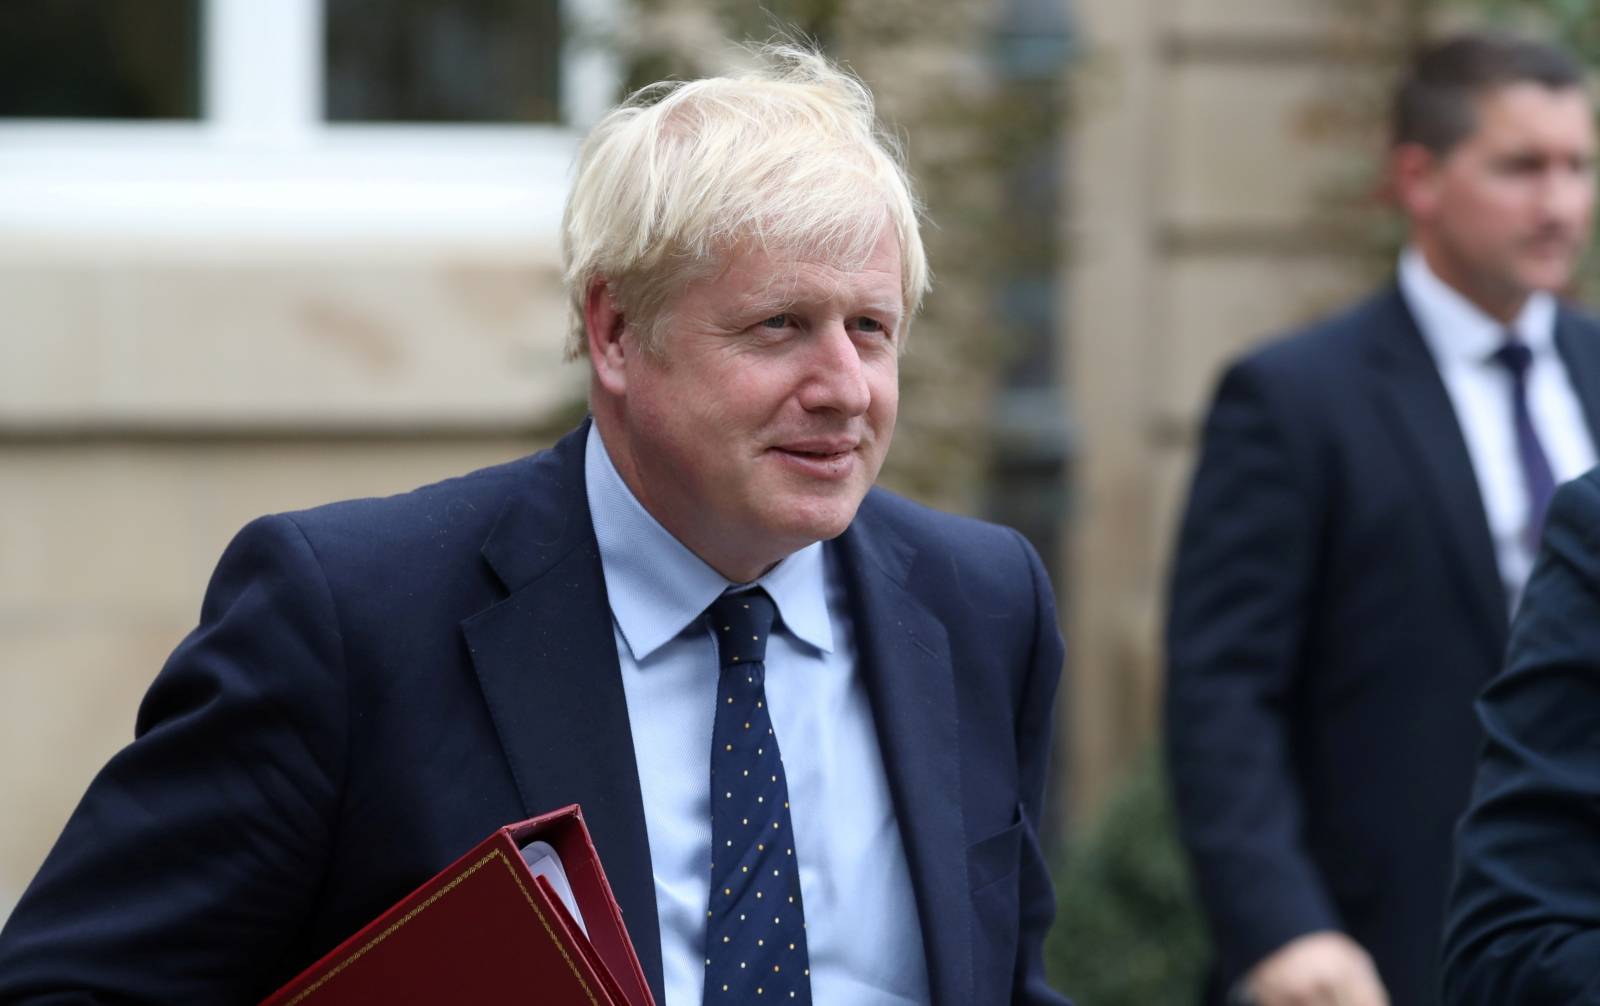 FILE PHOTO: British Prime Minister Boris Johnson leaves after his meeting with Luxembourg's prime minister